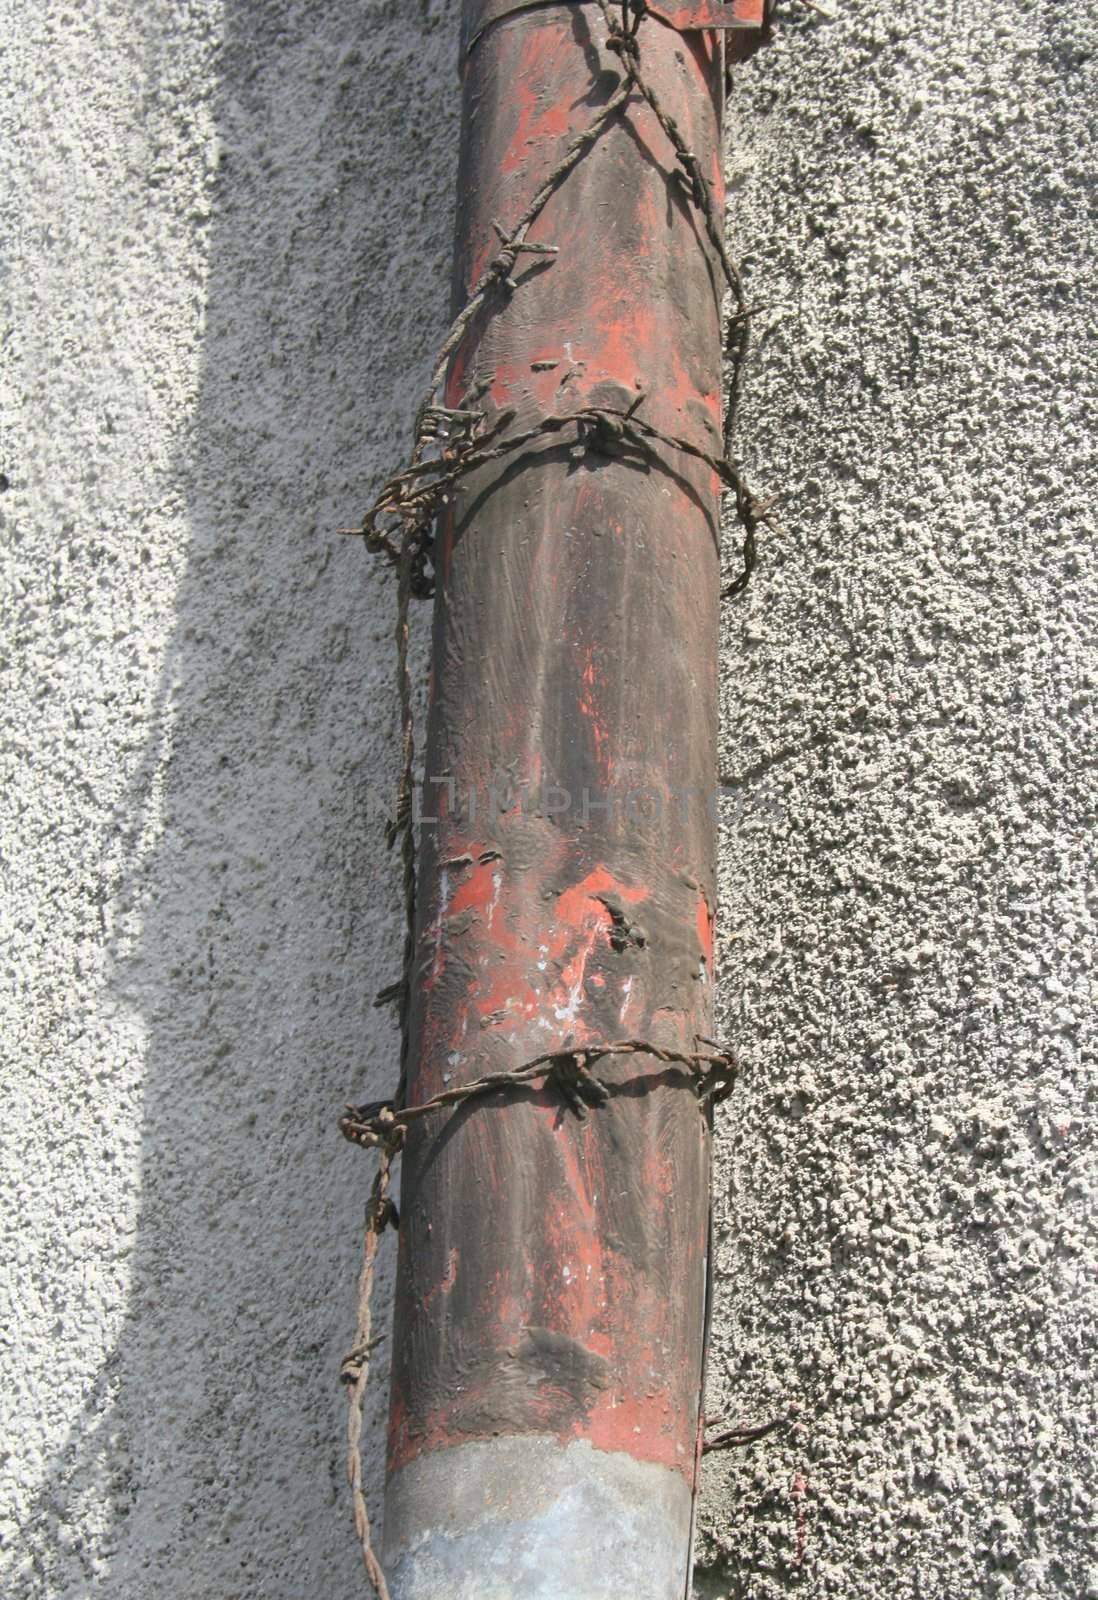 Rusty rain pipe with barbed wire